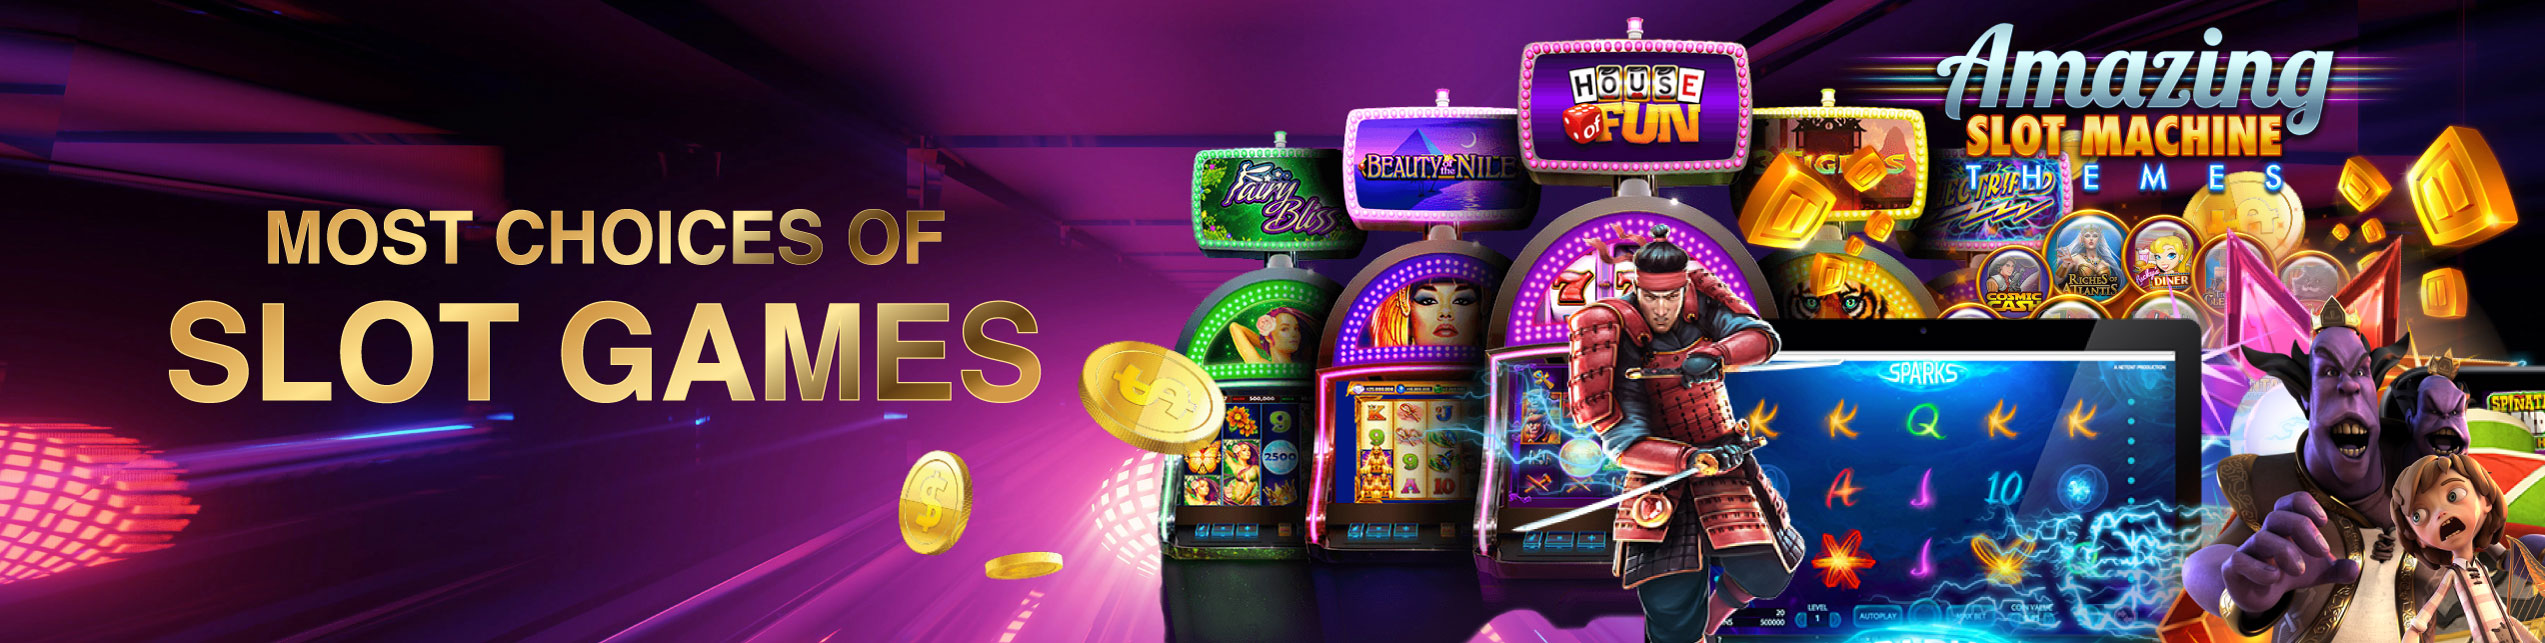 Most Choice Of Slot Game